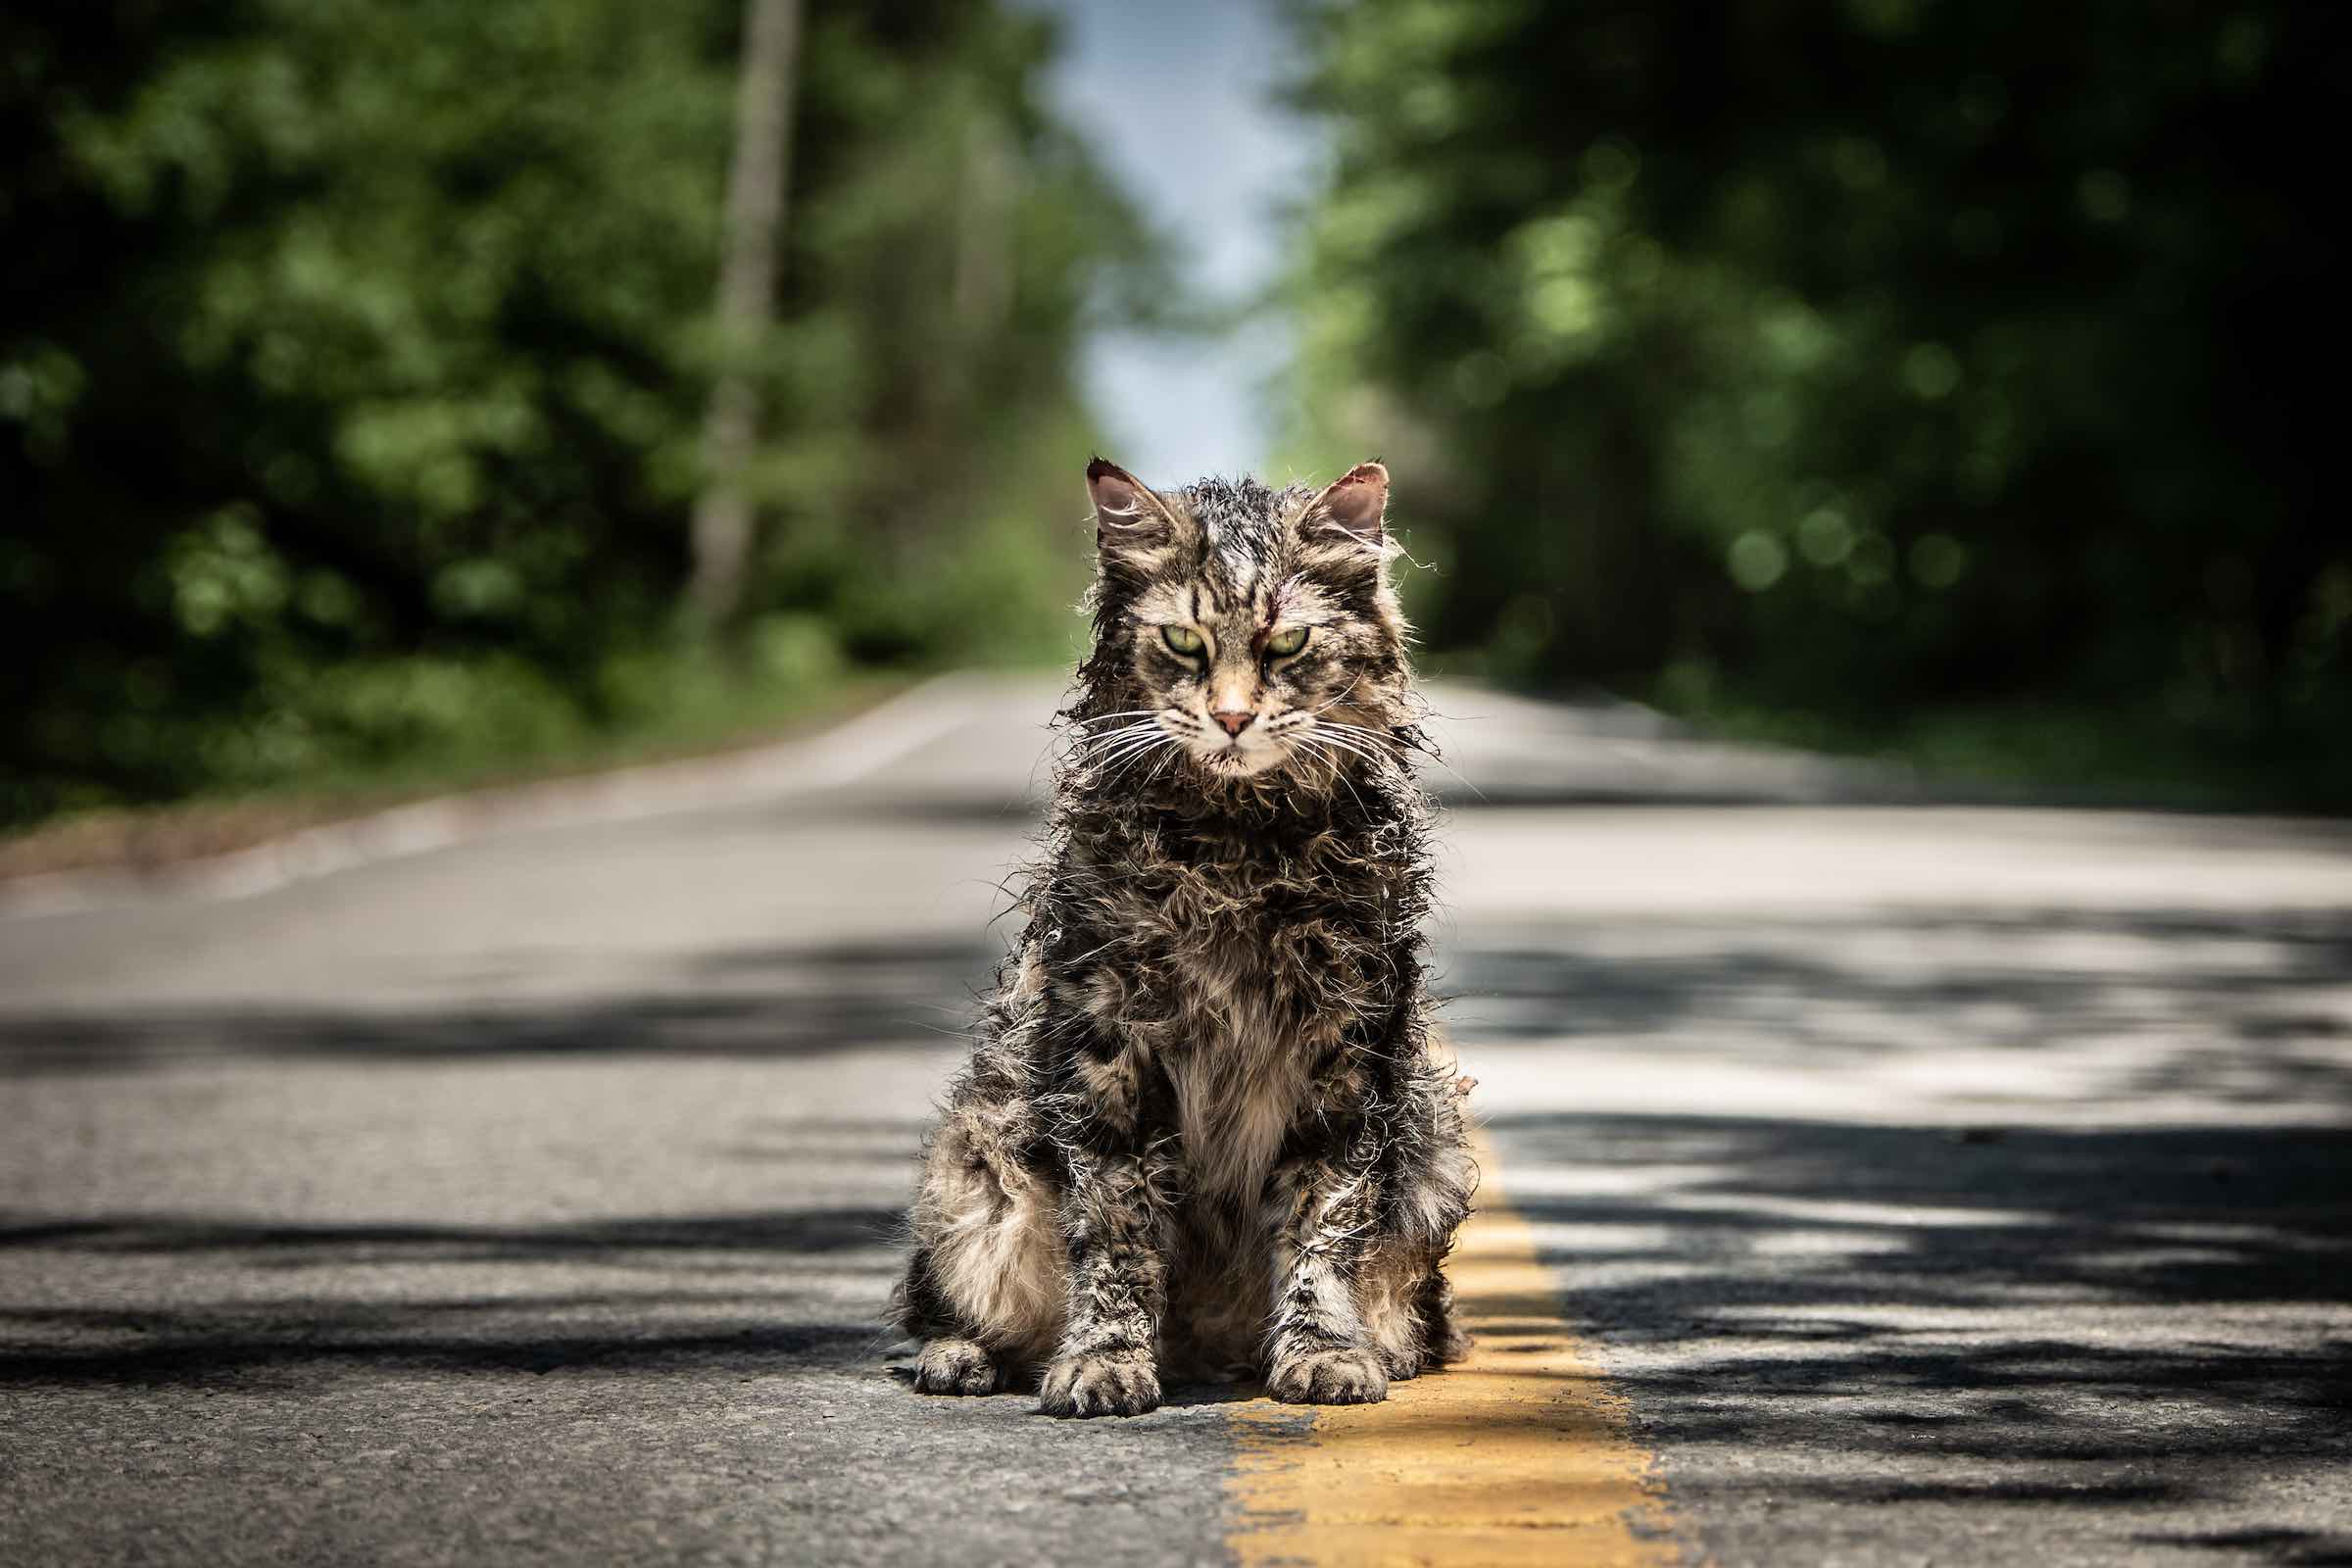 Hollywood remakes are a bad idea. We look at 'Pet Sematary' and other remakes that were dead on arrival.